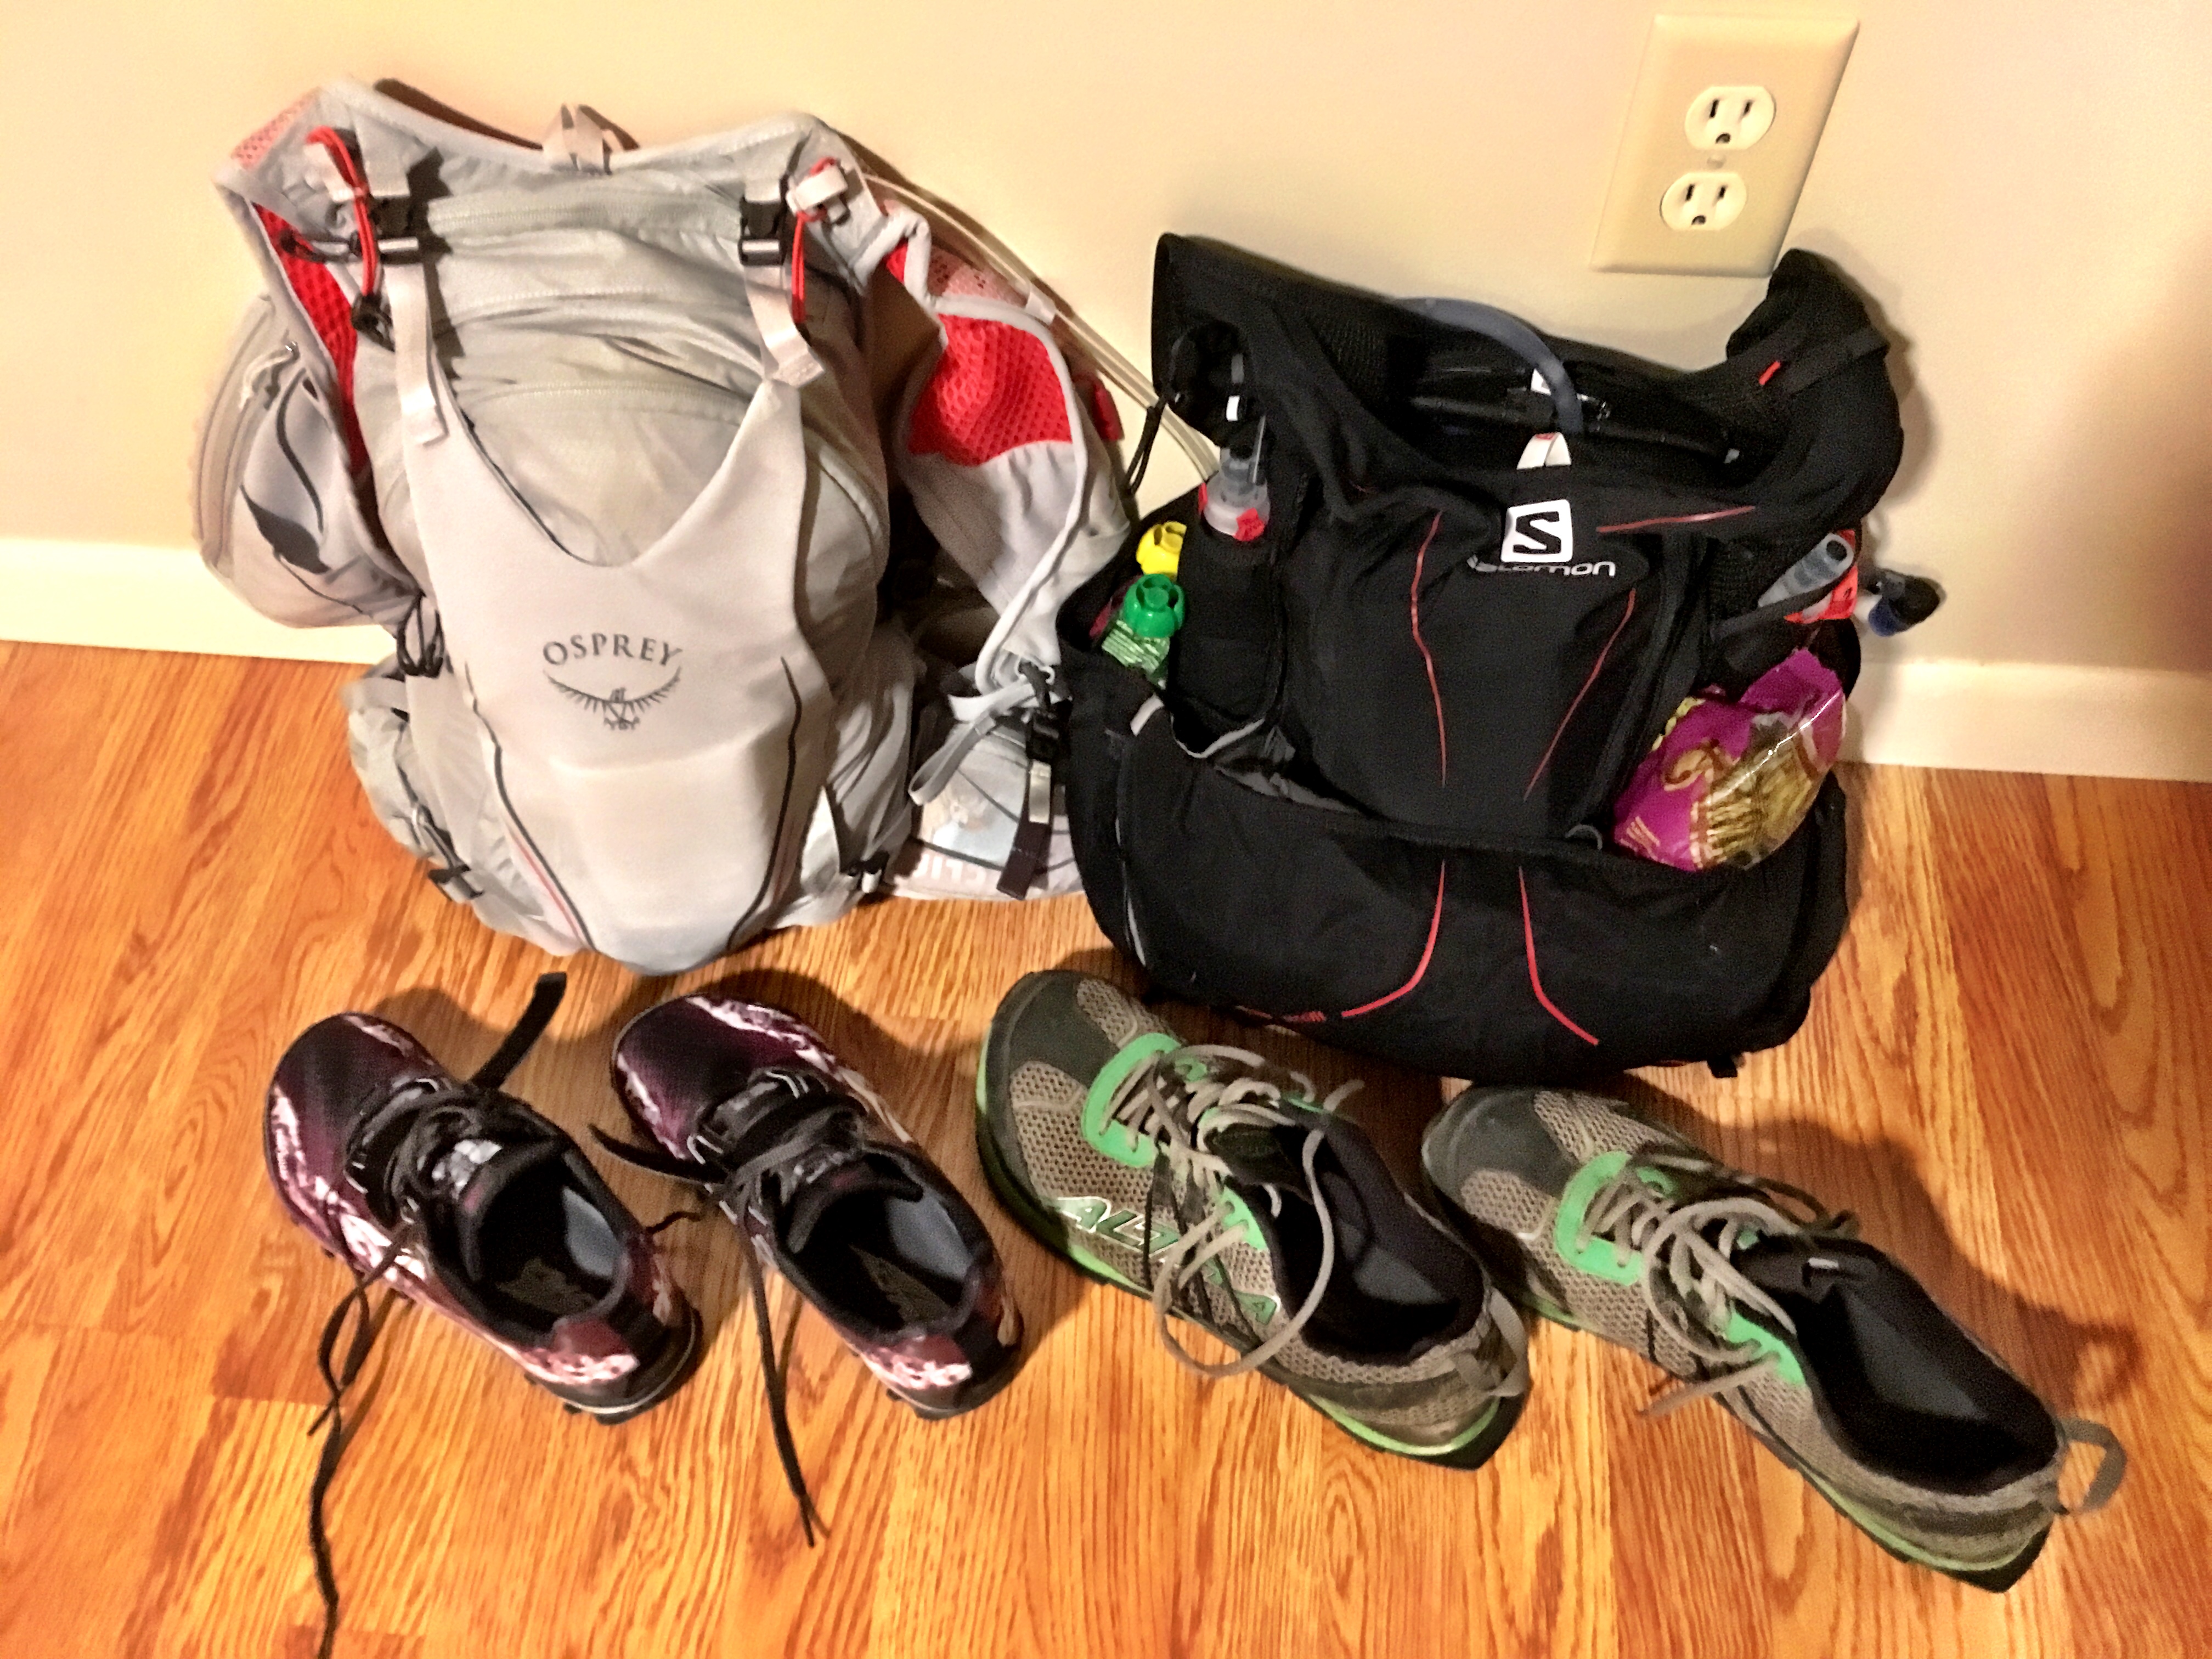 Trail running gear for Stevens Pass to Snoqualmie Pass